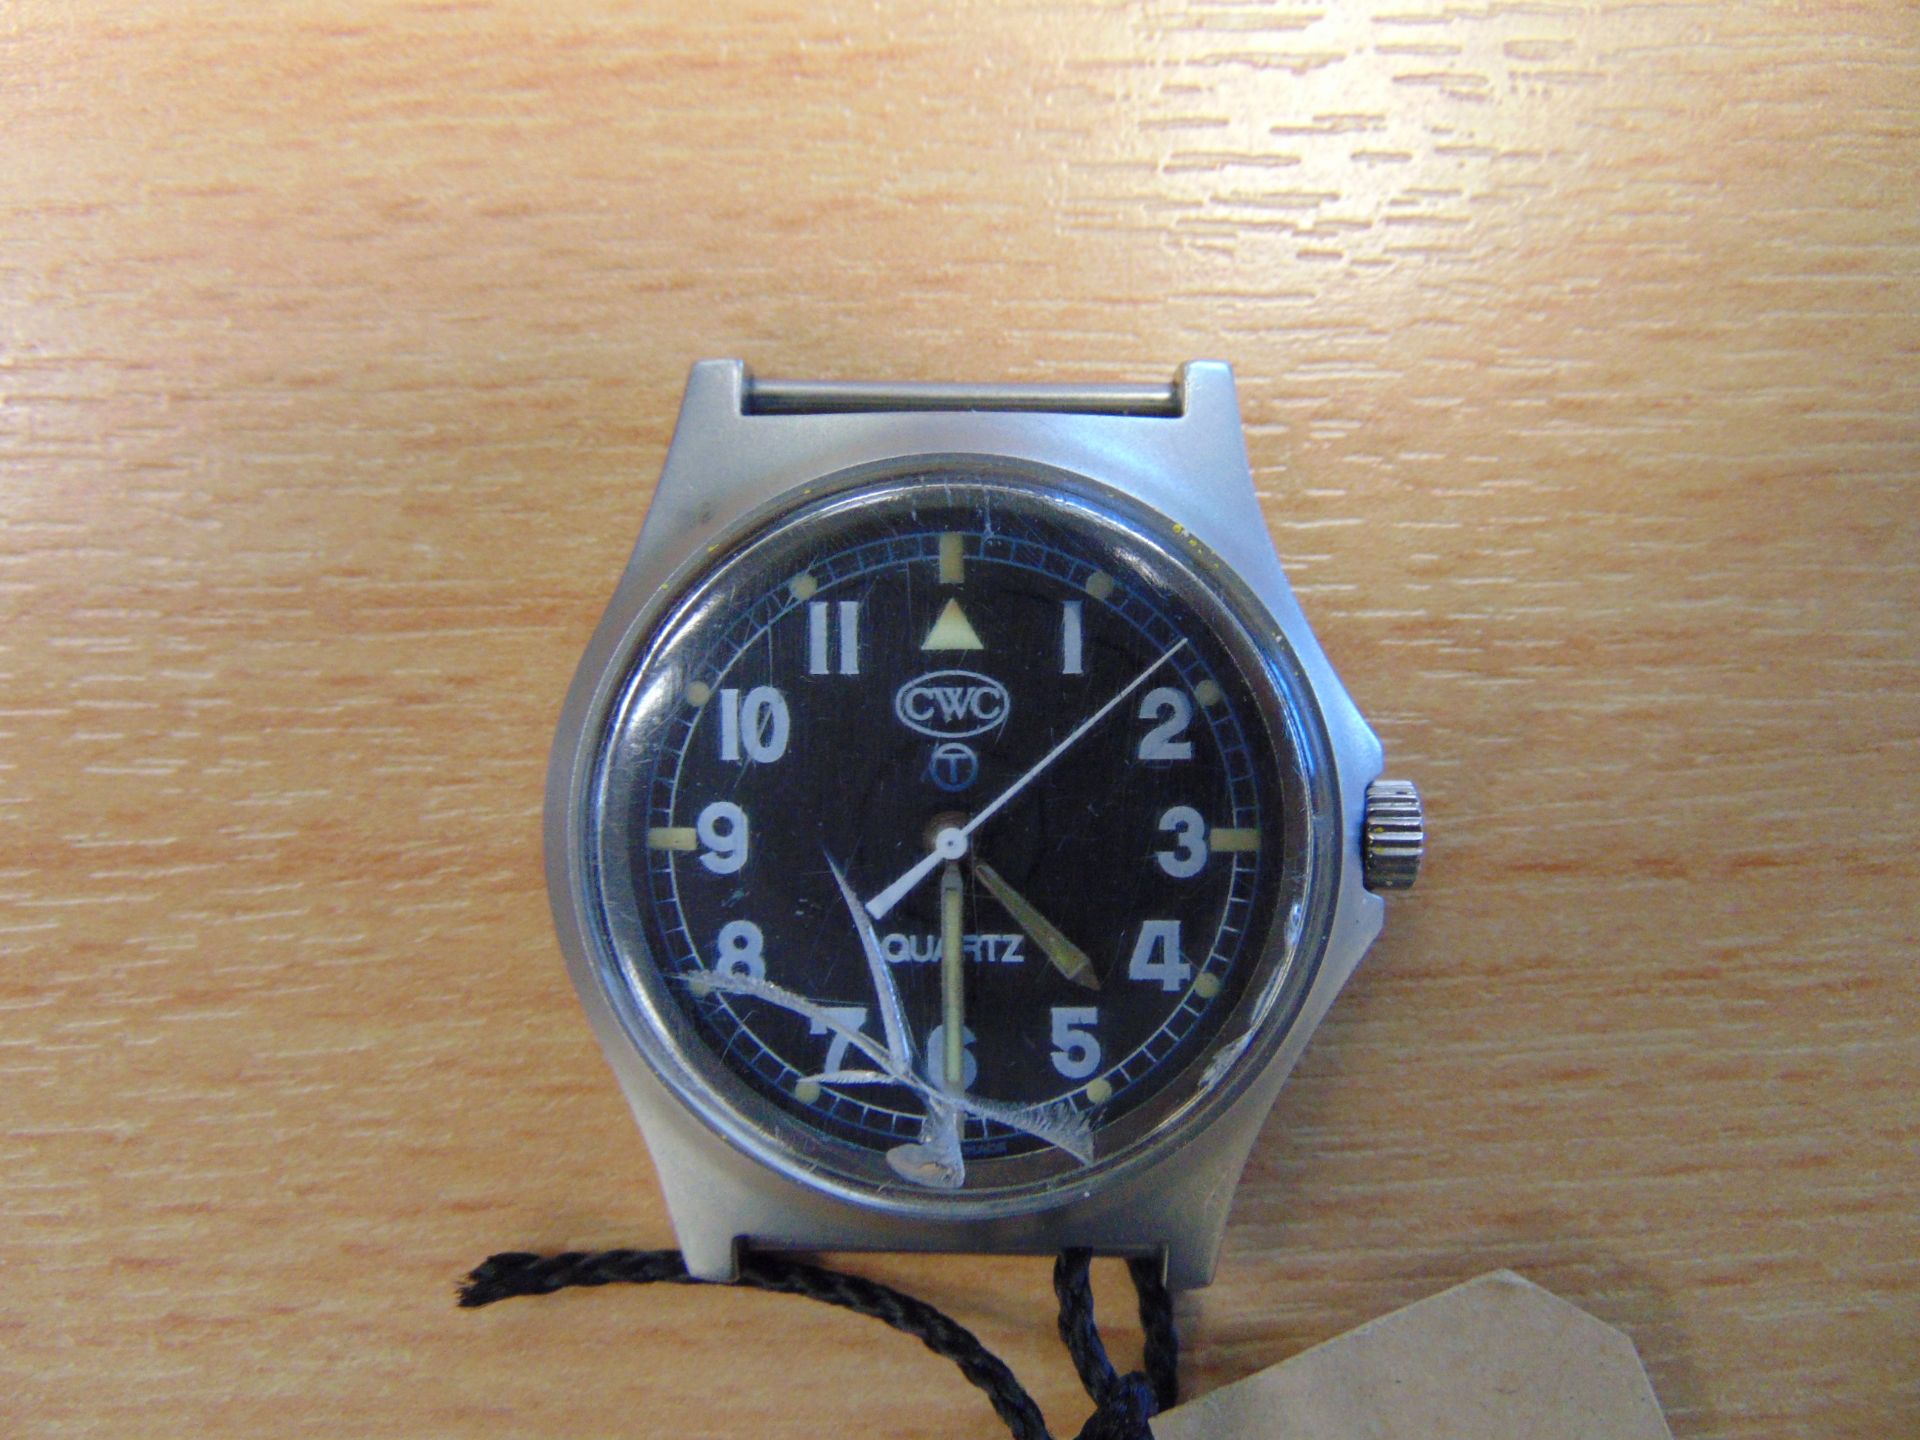 CWC (Cabot Watch Co Switzerland) 0555 Royal Marines / Navy Service Watch, Nato Marks, Date 1995 - Image 2 of 4